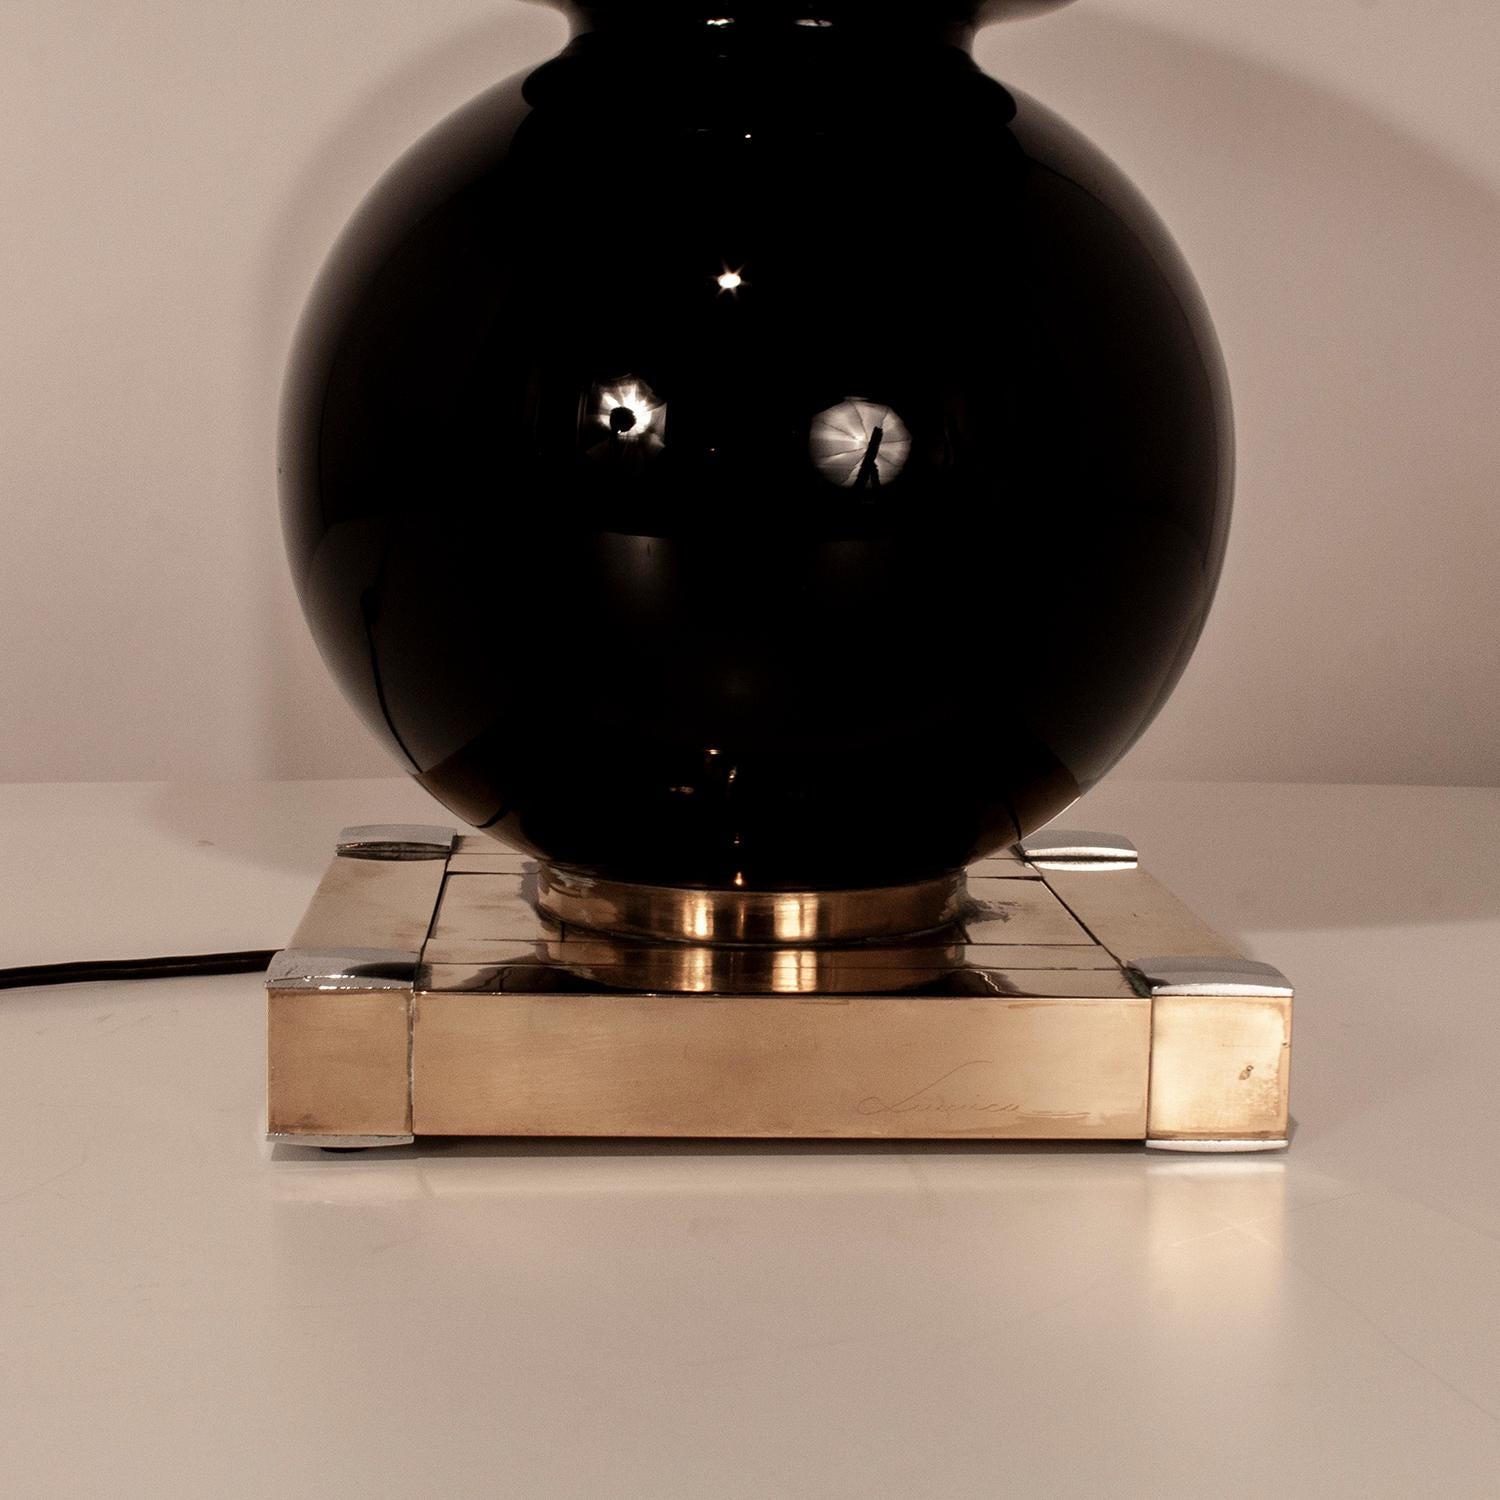 Midcentury Table Lamp Designed by Willy Rizzo, 1970s for Lumica, Spain, Brass In Good Condition For Sale In Barcelona, Cataluna